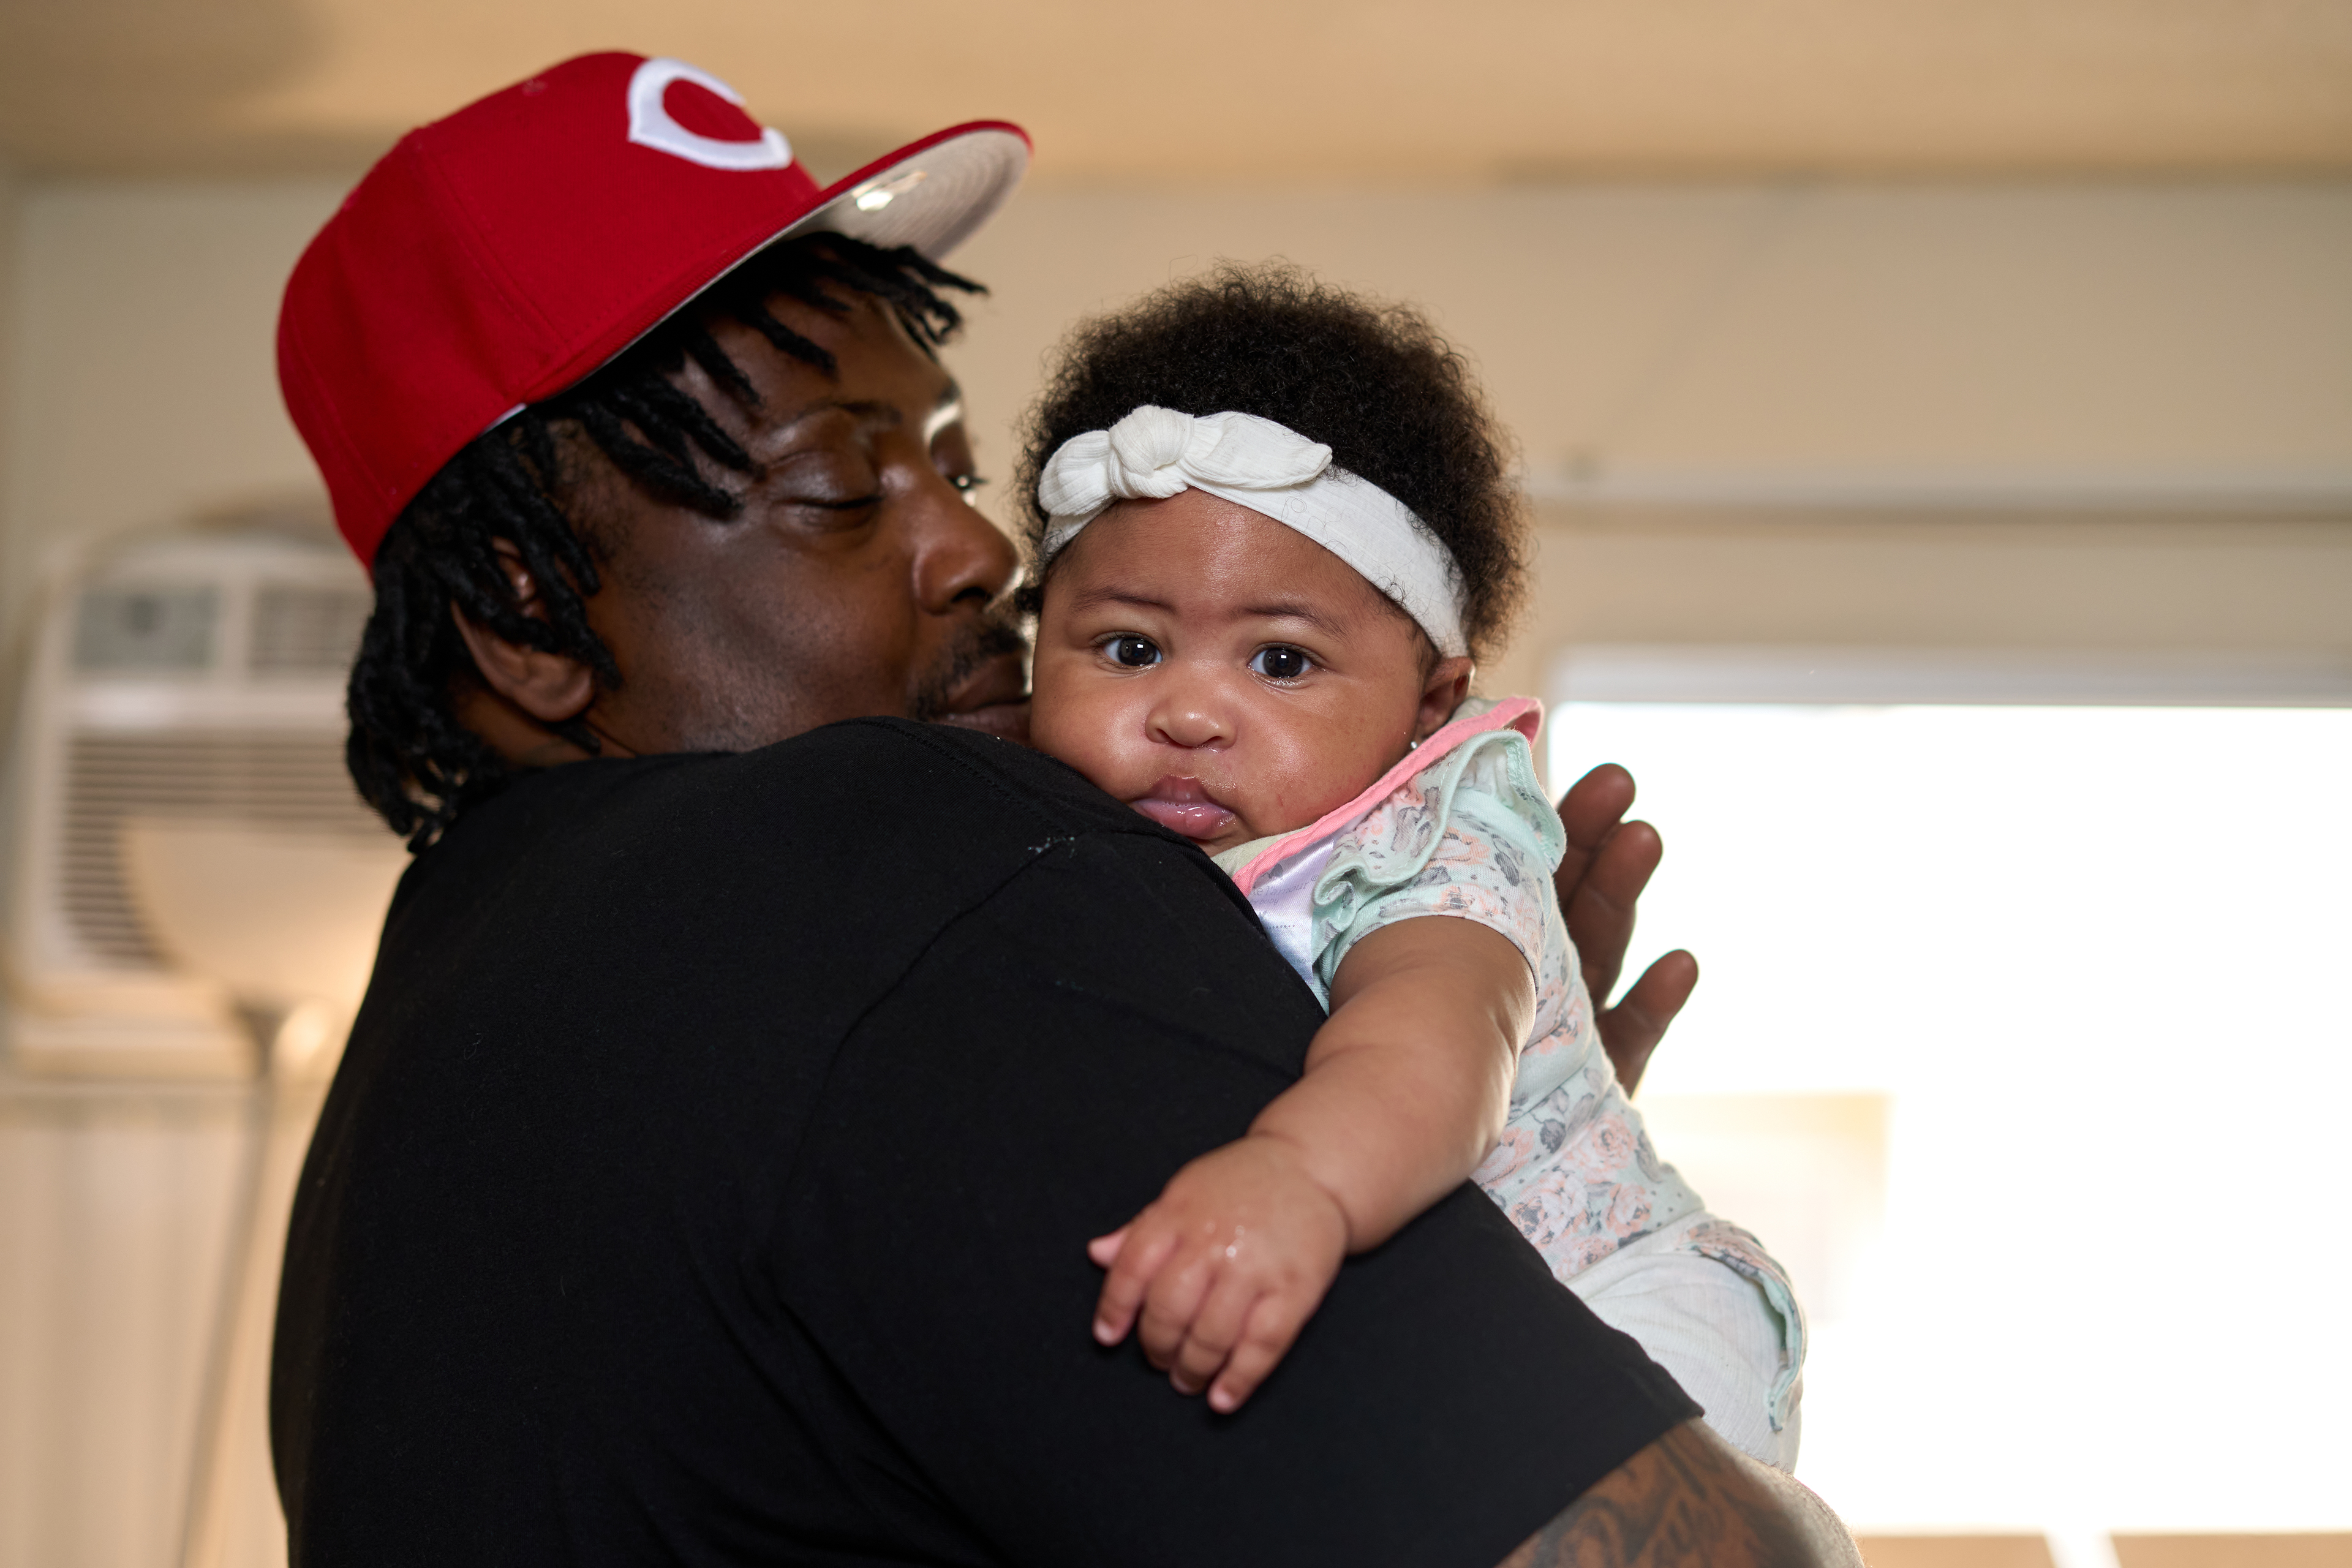 A man in a red sports cap, short dreadlocks below, holds a chubby baby across his shoulder. The baby, wearing a white bow headband across her curly dark hair, stares directly at the camera. 